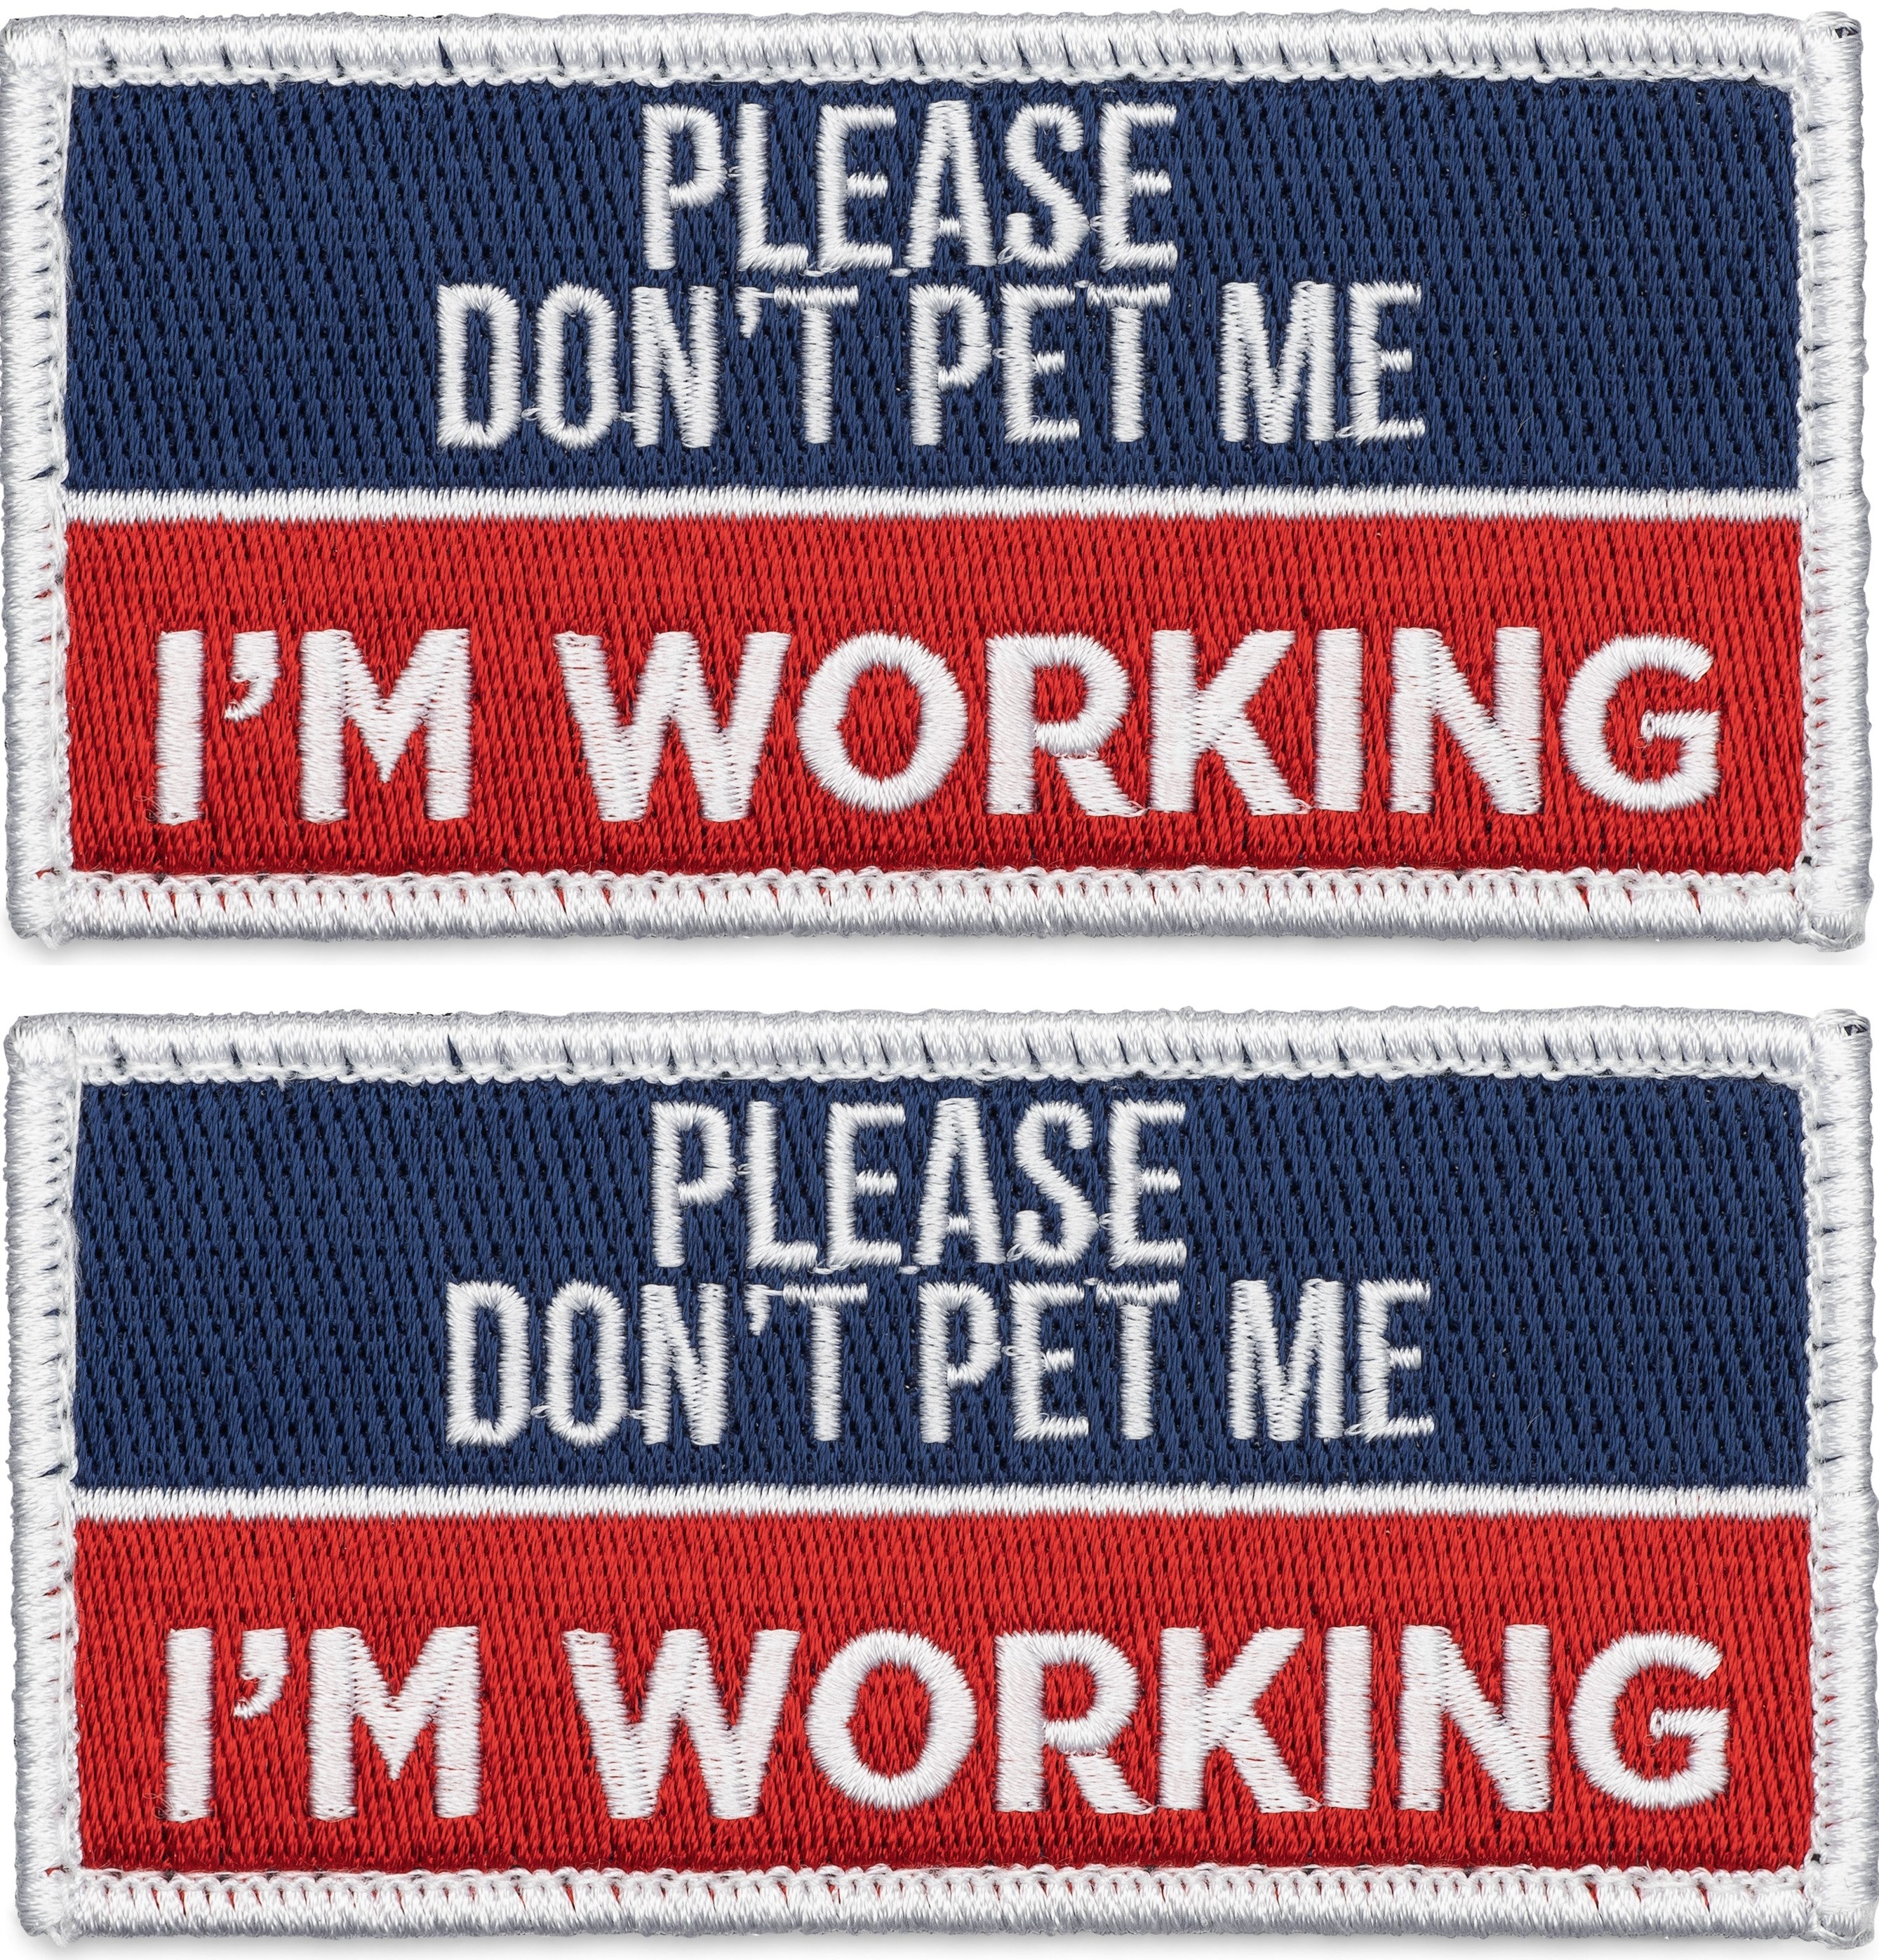 Doggie Stylz Do Not Pet Dog Patch, 2 Count, Small